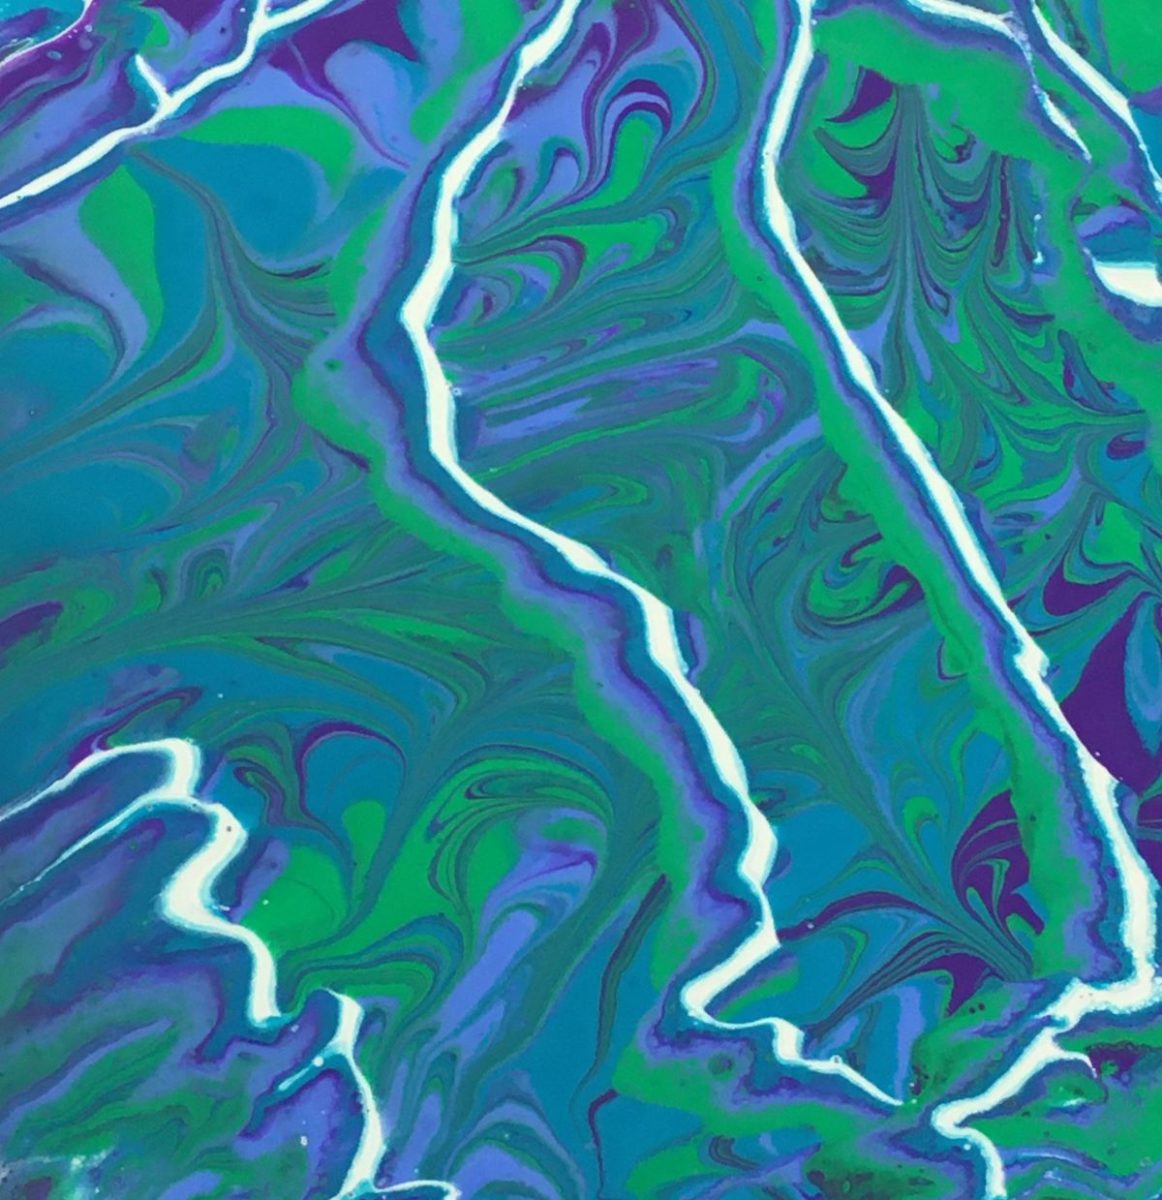 Green, blue and white marbled pour over art, made with acrylic paint